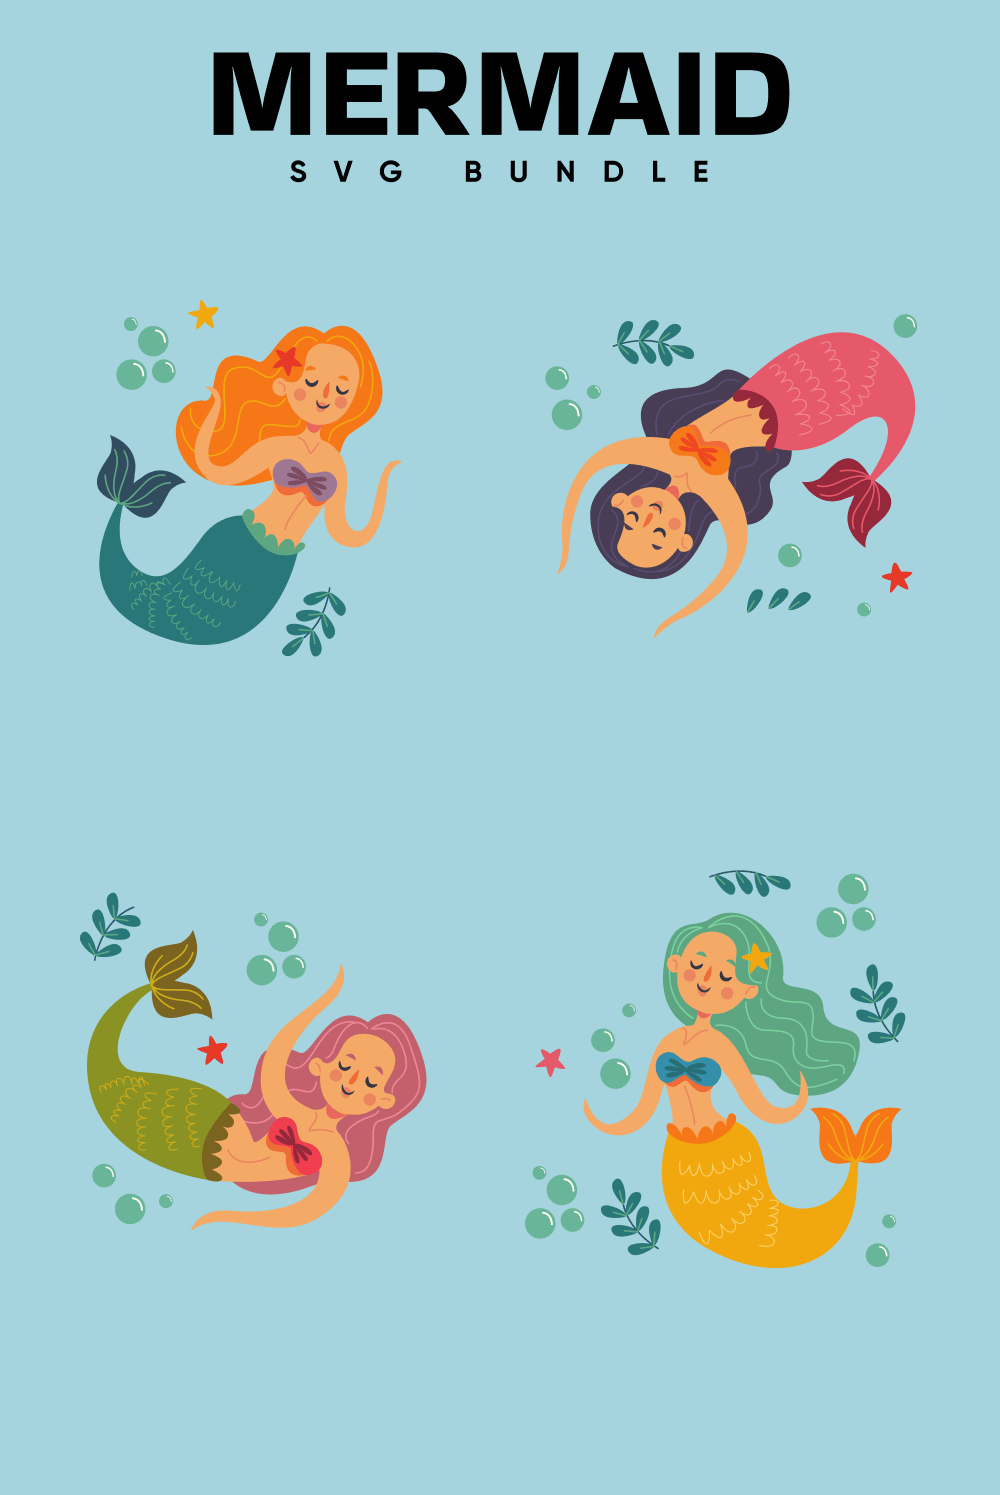 Red-haired, brunette, with green and pink hair mermaids with colored tails.